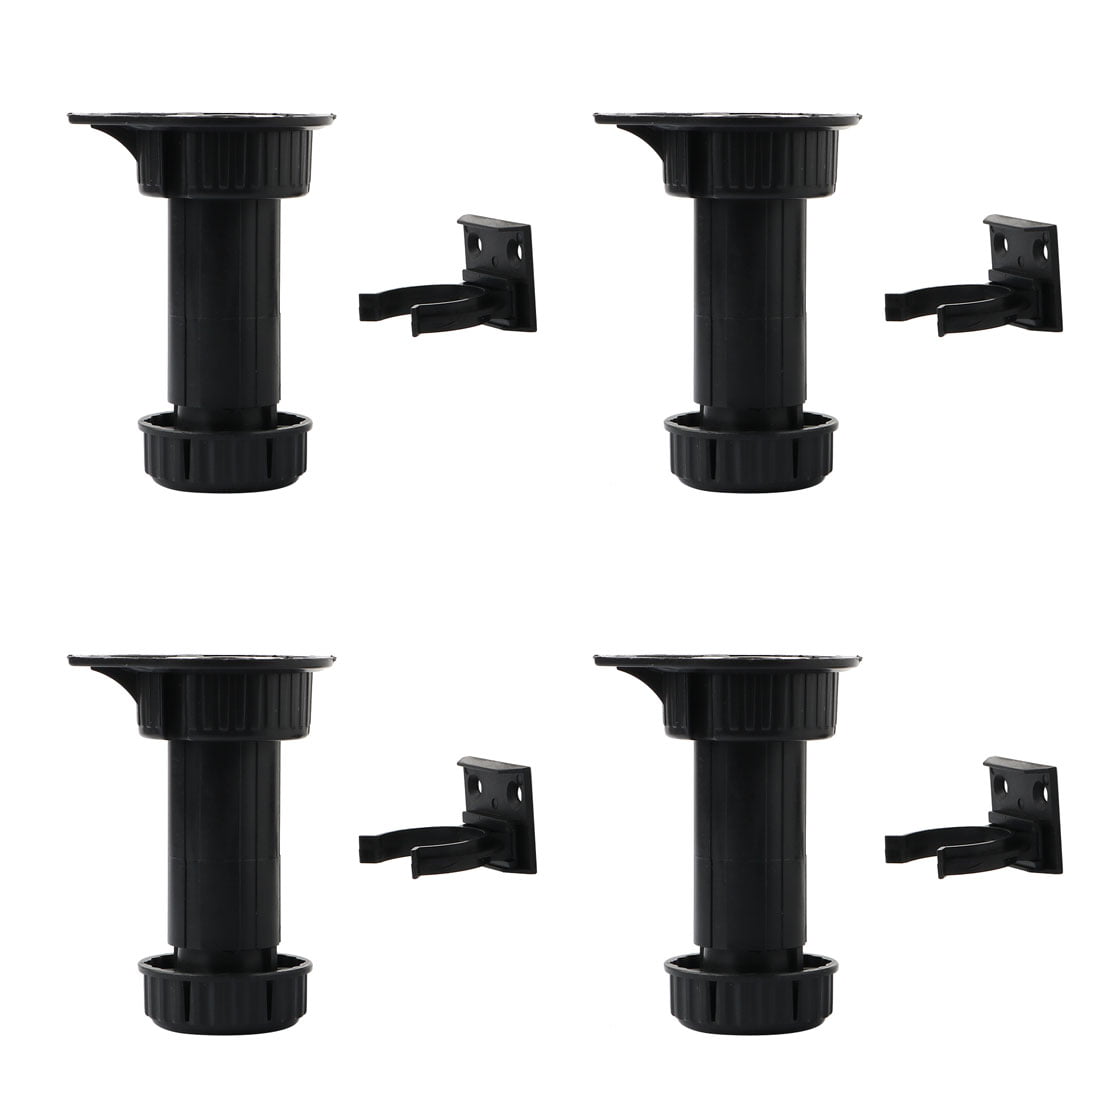 x 43mm Dia Total:100-145mm 4pcs PP Adjustable Kitchen Cabinet Legs Feet Height 